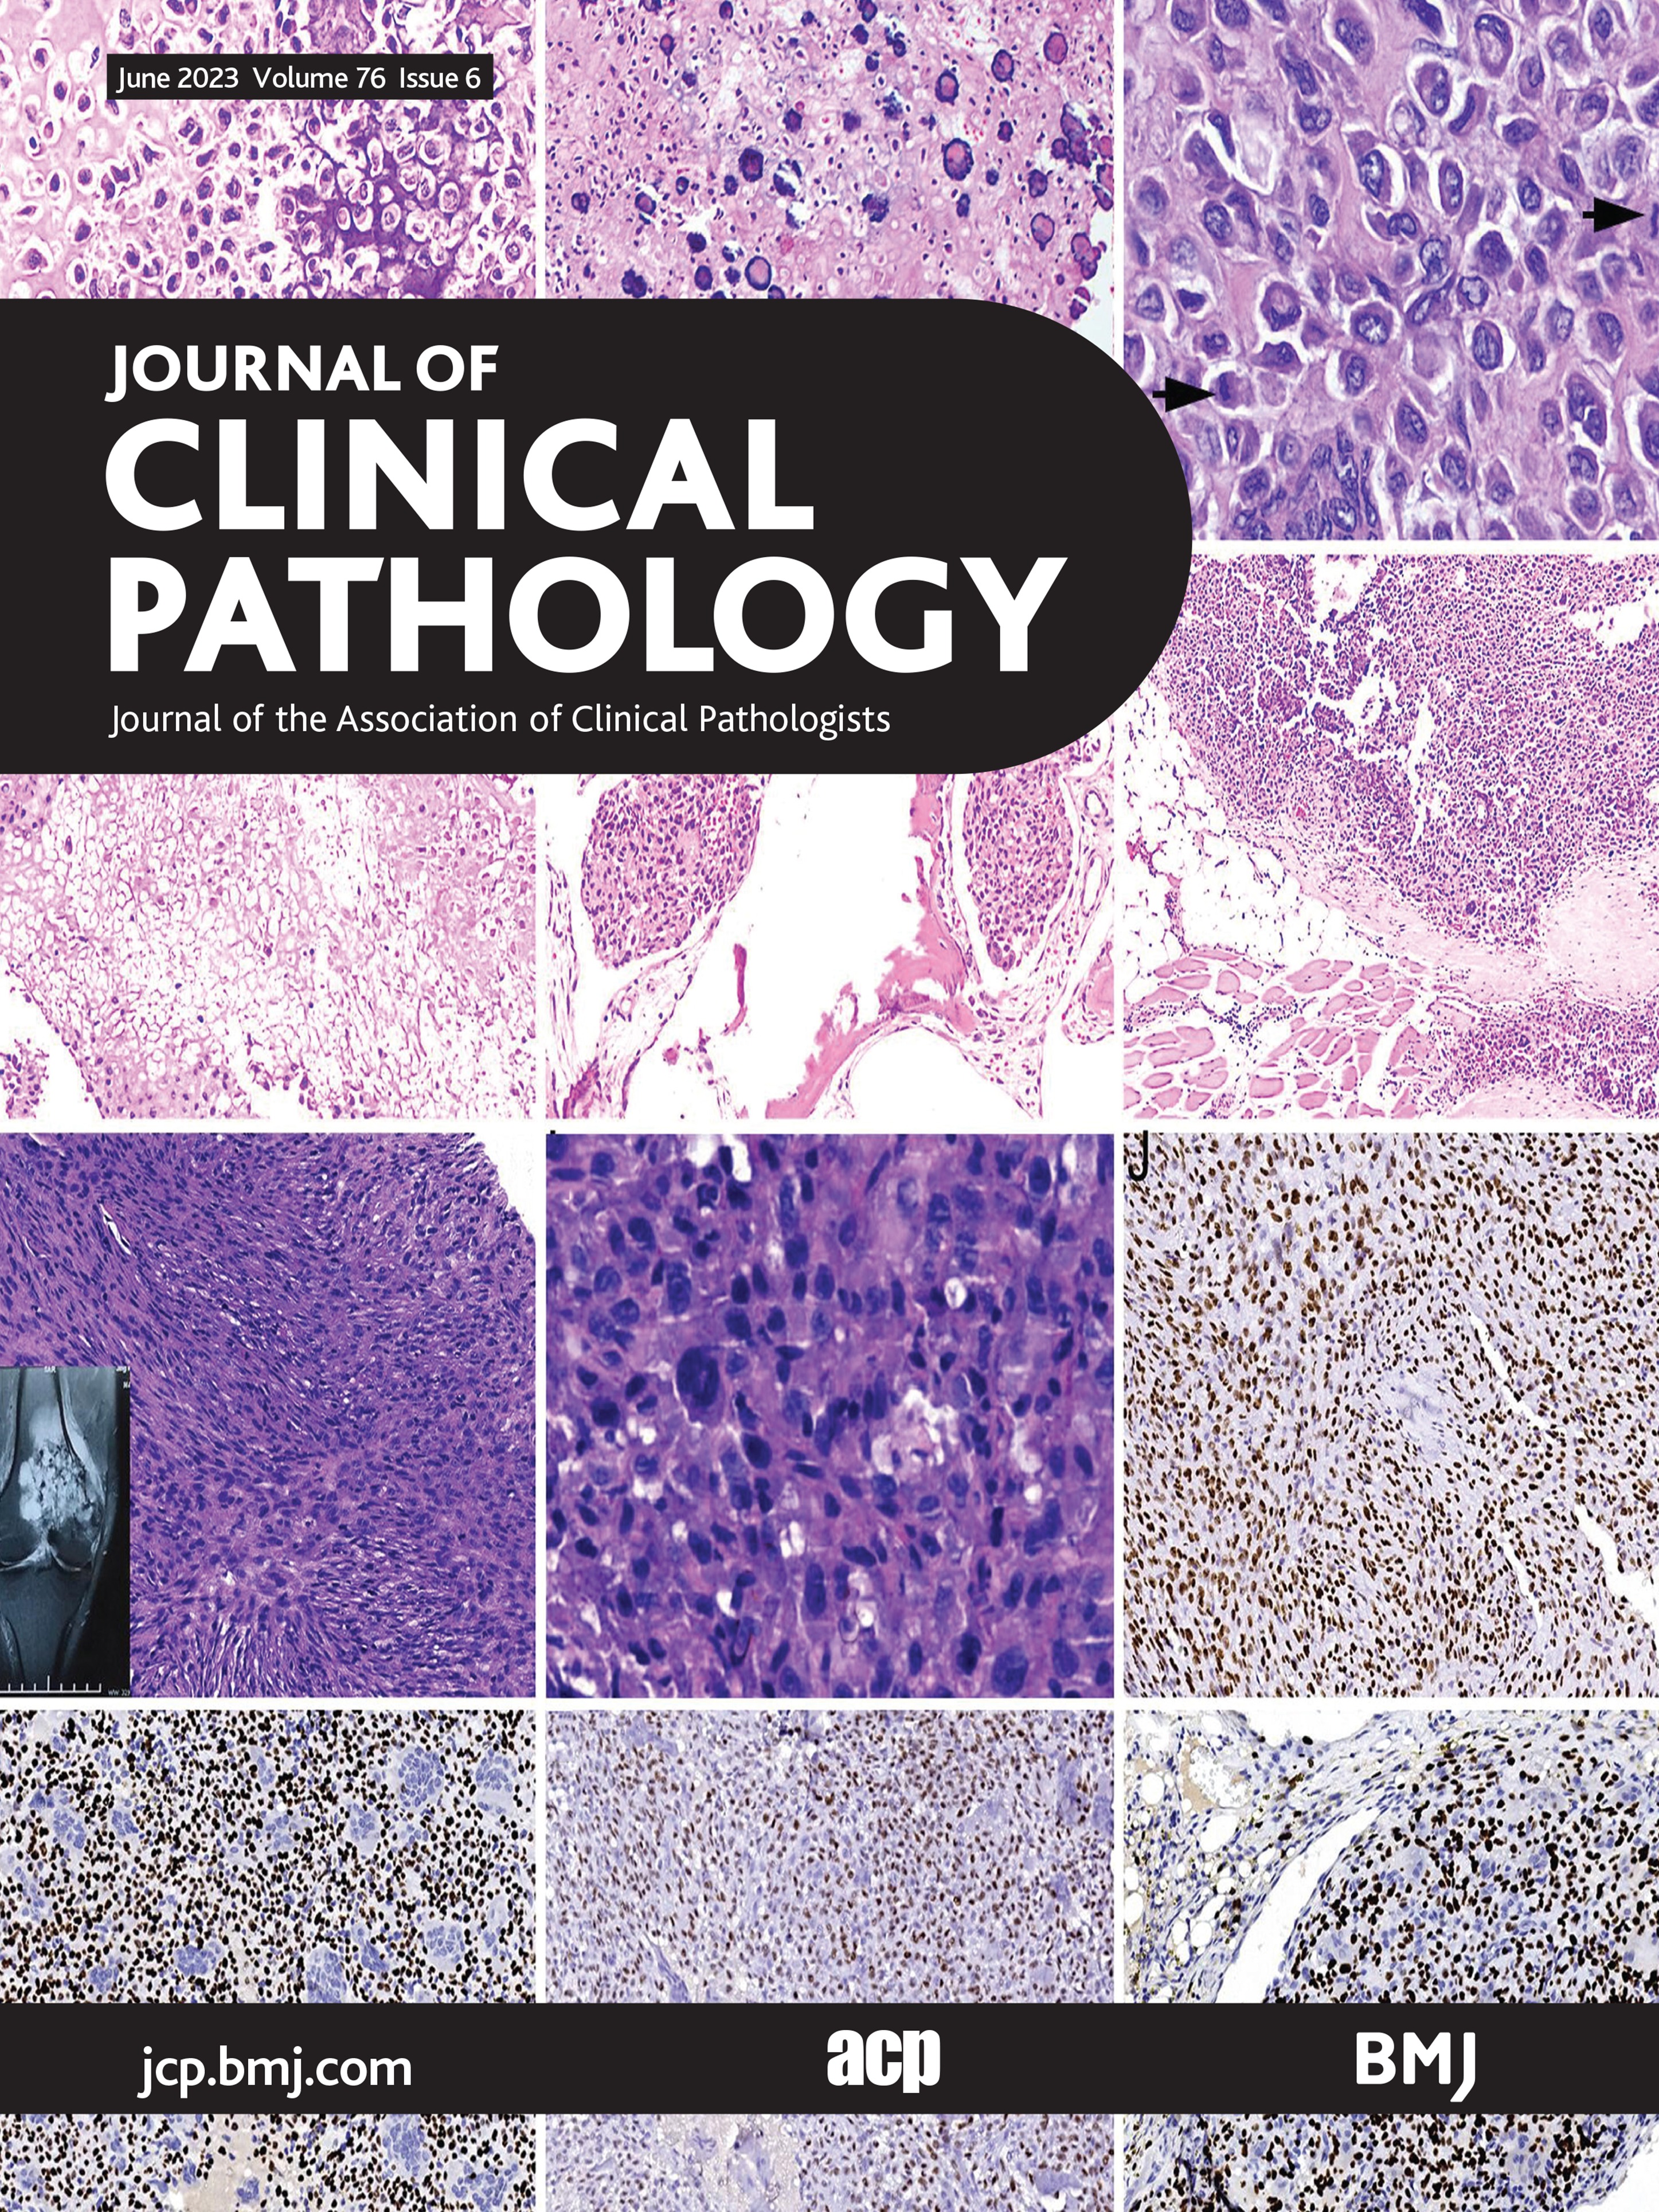 'Atypical, 'aggressive or 'malignant chondroblastoma? Uncertainty about uncertain malignant potential